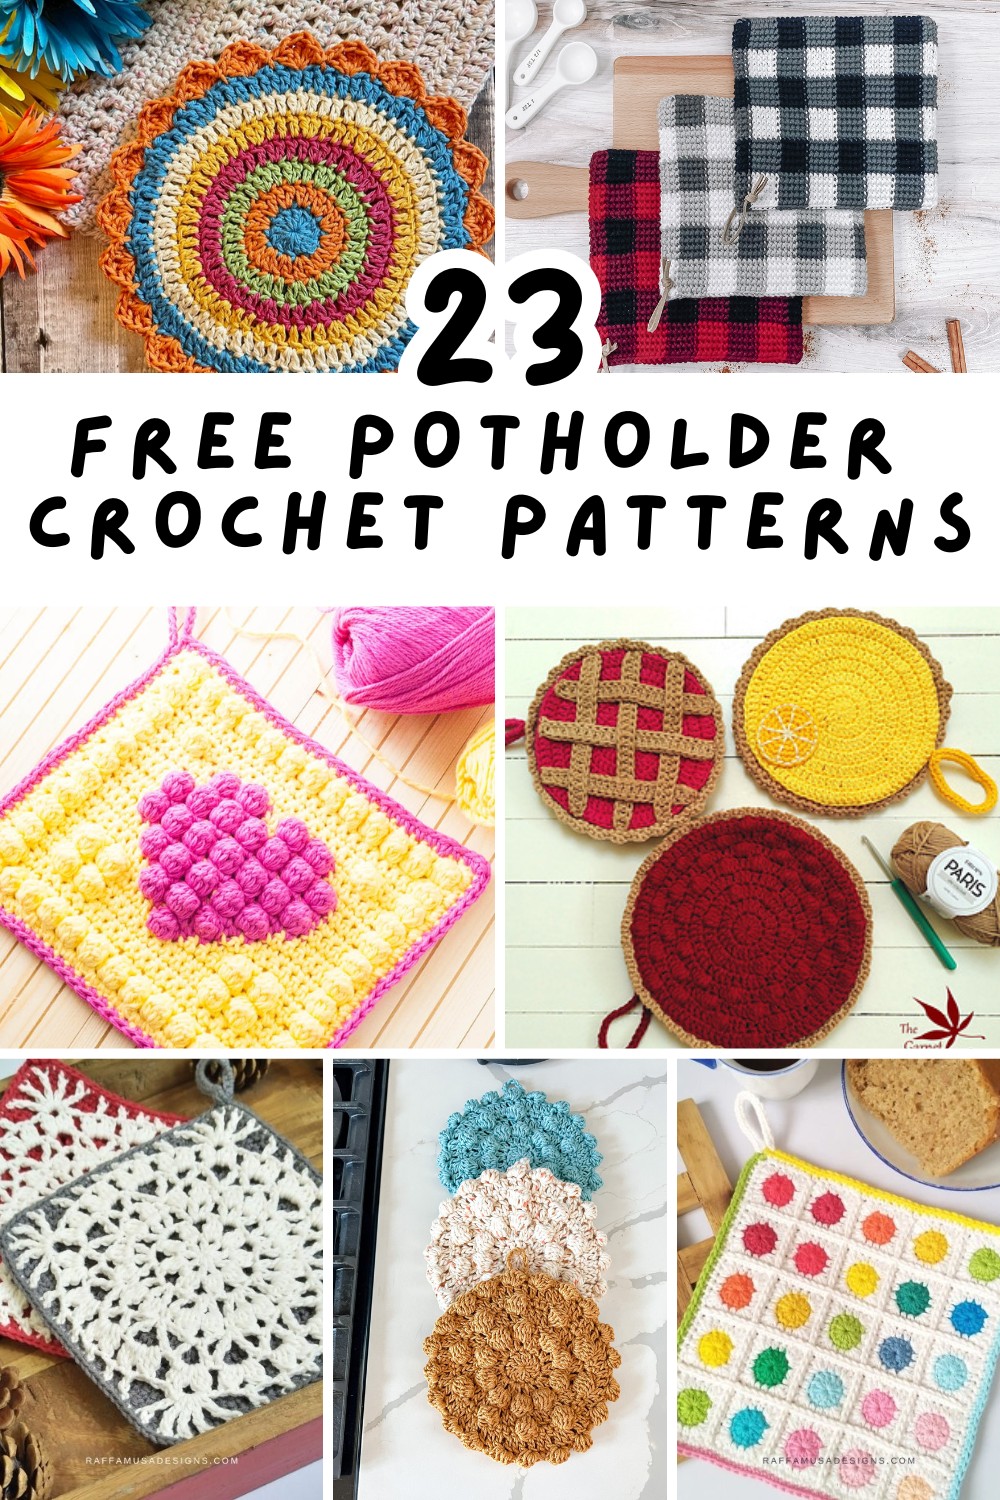 🧶✨ Discover a delightful roundup of free crochet potholder patterns that are both practical and pretty! From modern designs to rustic charm and cute novelty styles, find the perfect project to brighten up your kitchen or gift to a friend. 🍳💖 #potholders #freecrochetpatterns